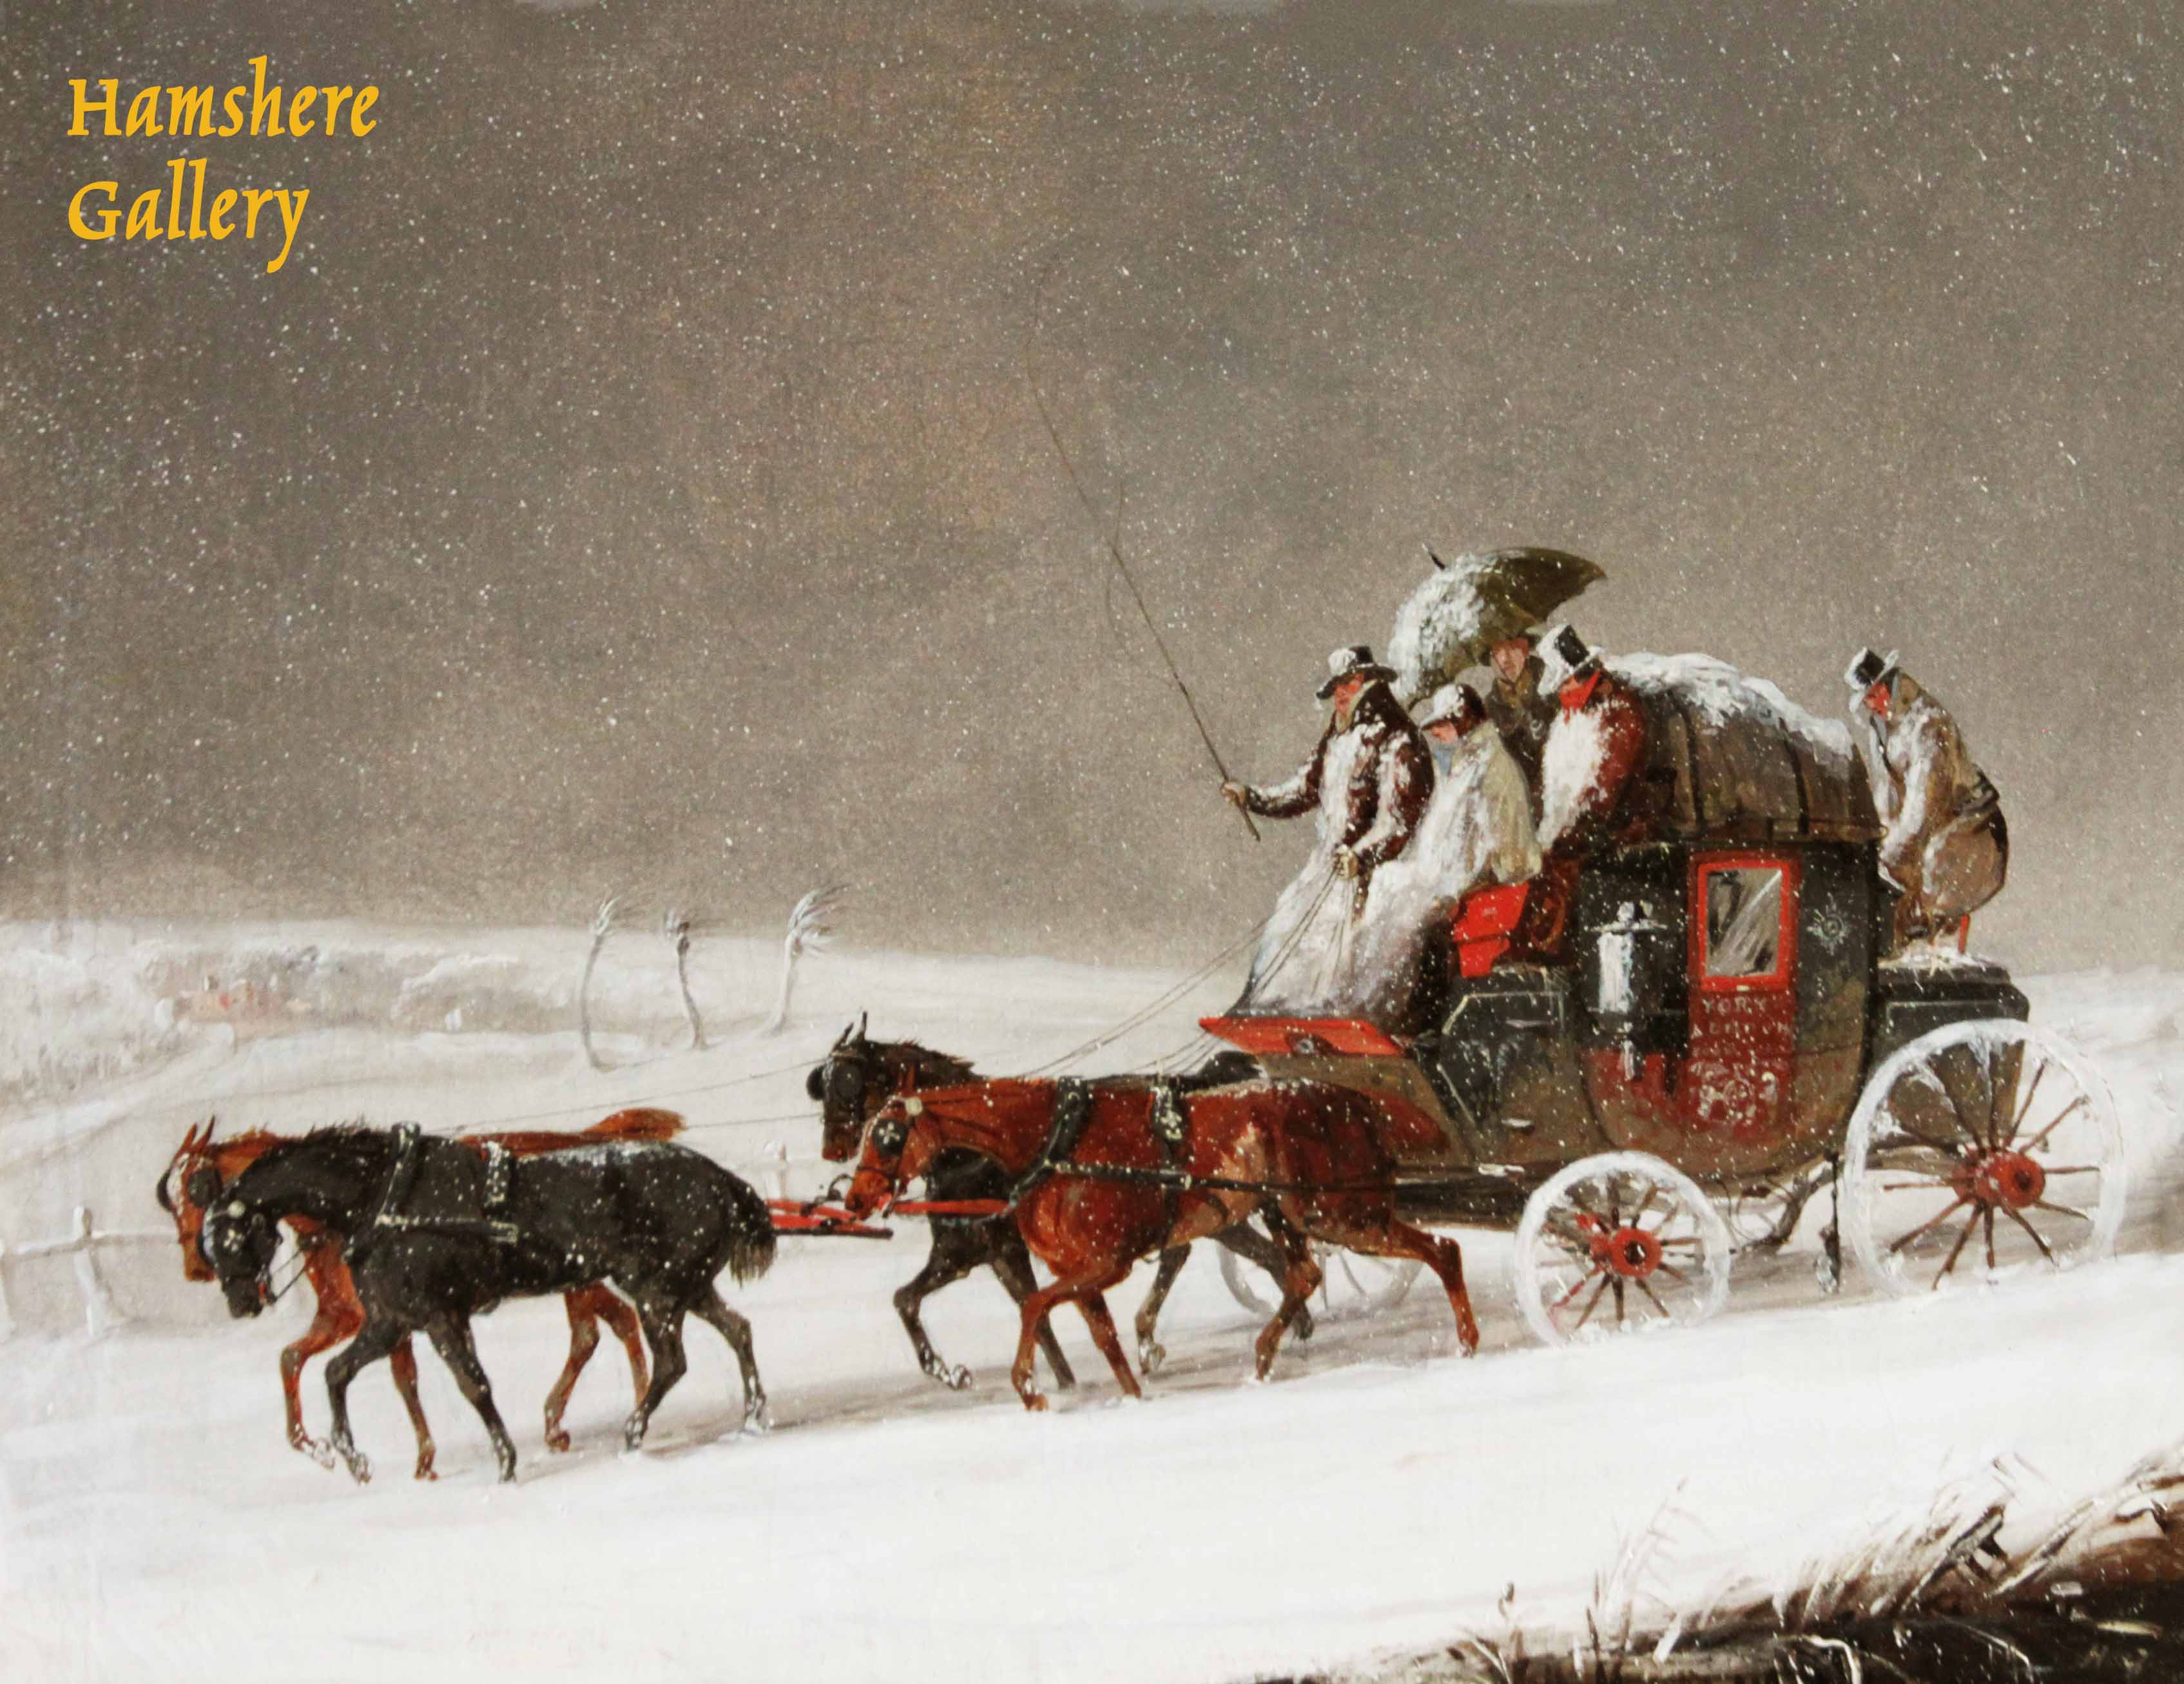 Click to see full size: The York and London Mail in a snowstorm by Henry Thomas Alken Snr web.jpg The York and London Mail in a snowstorm by Henry Thomas Alken Snr. (English, 1785 â€“ 1851). Signed with initials